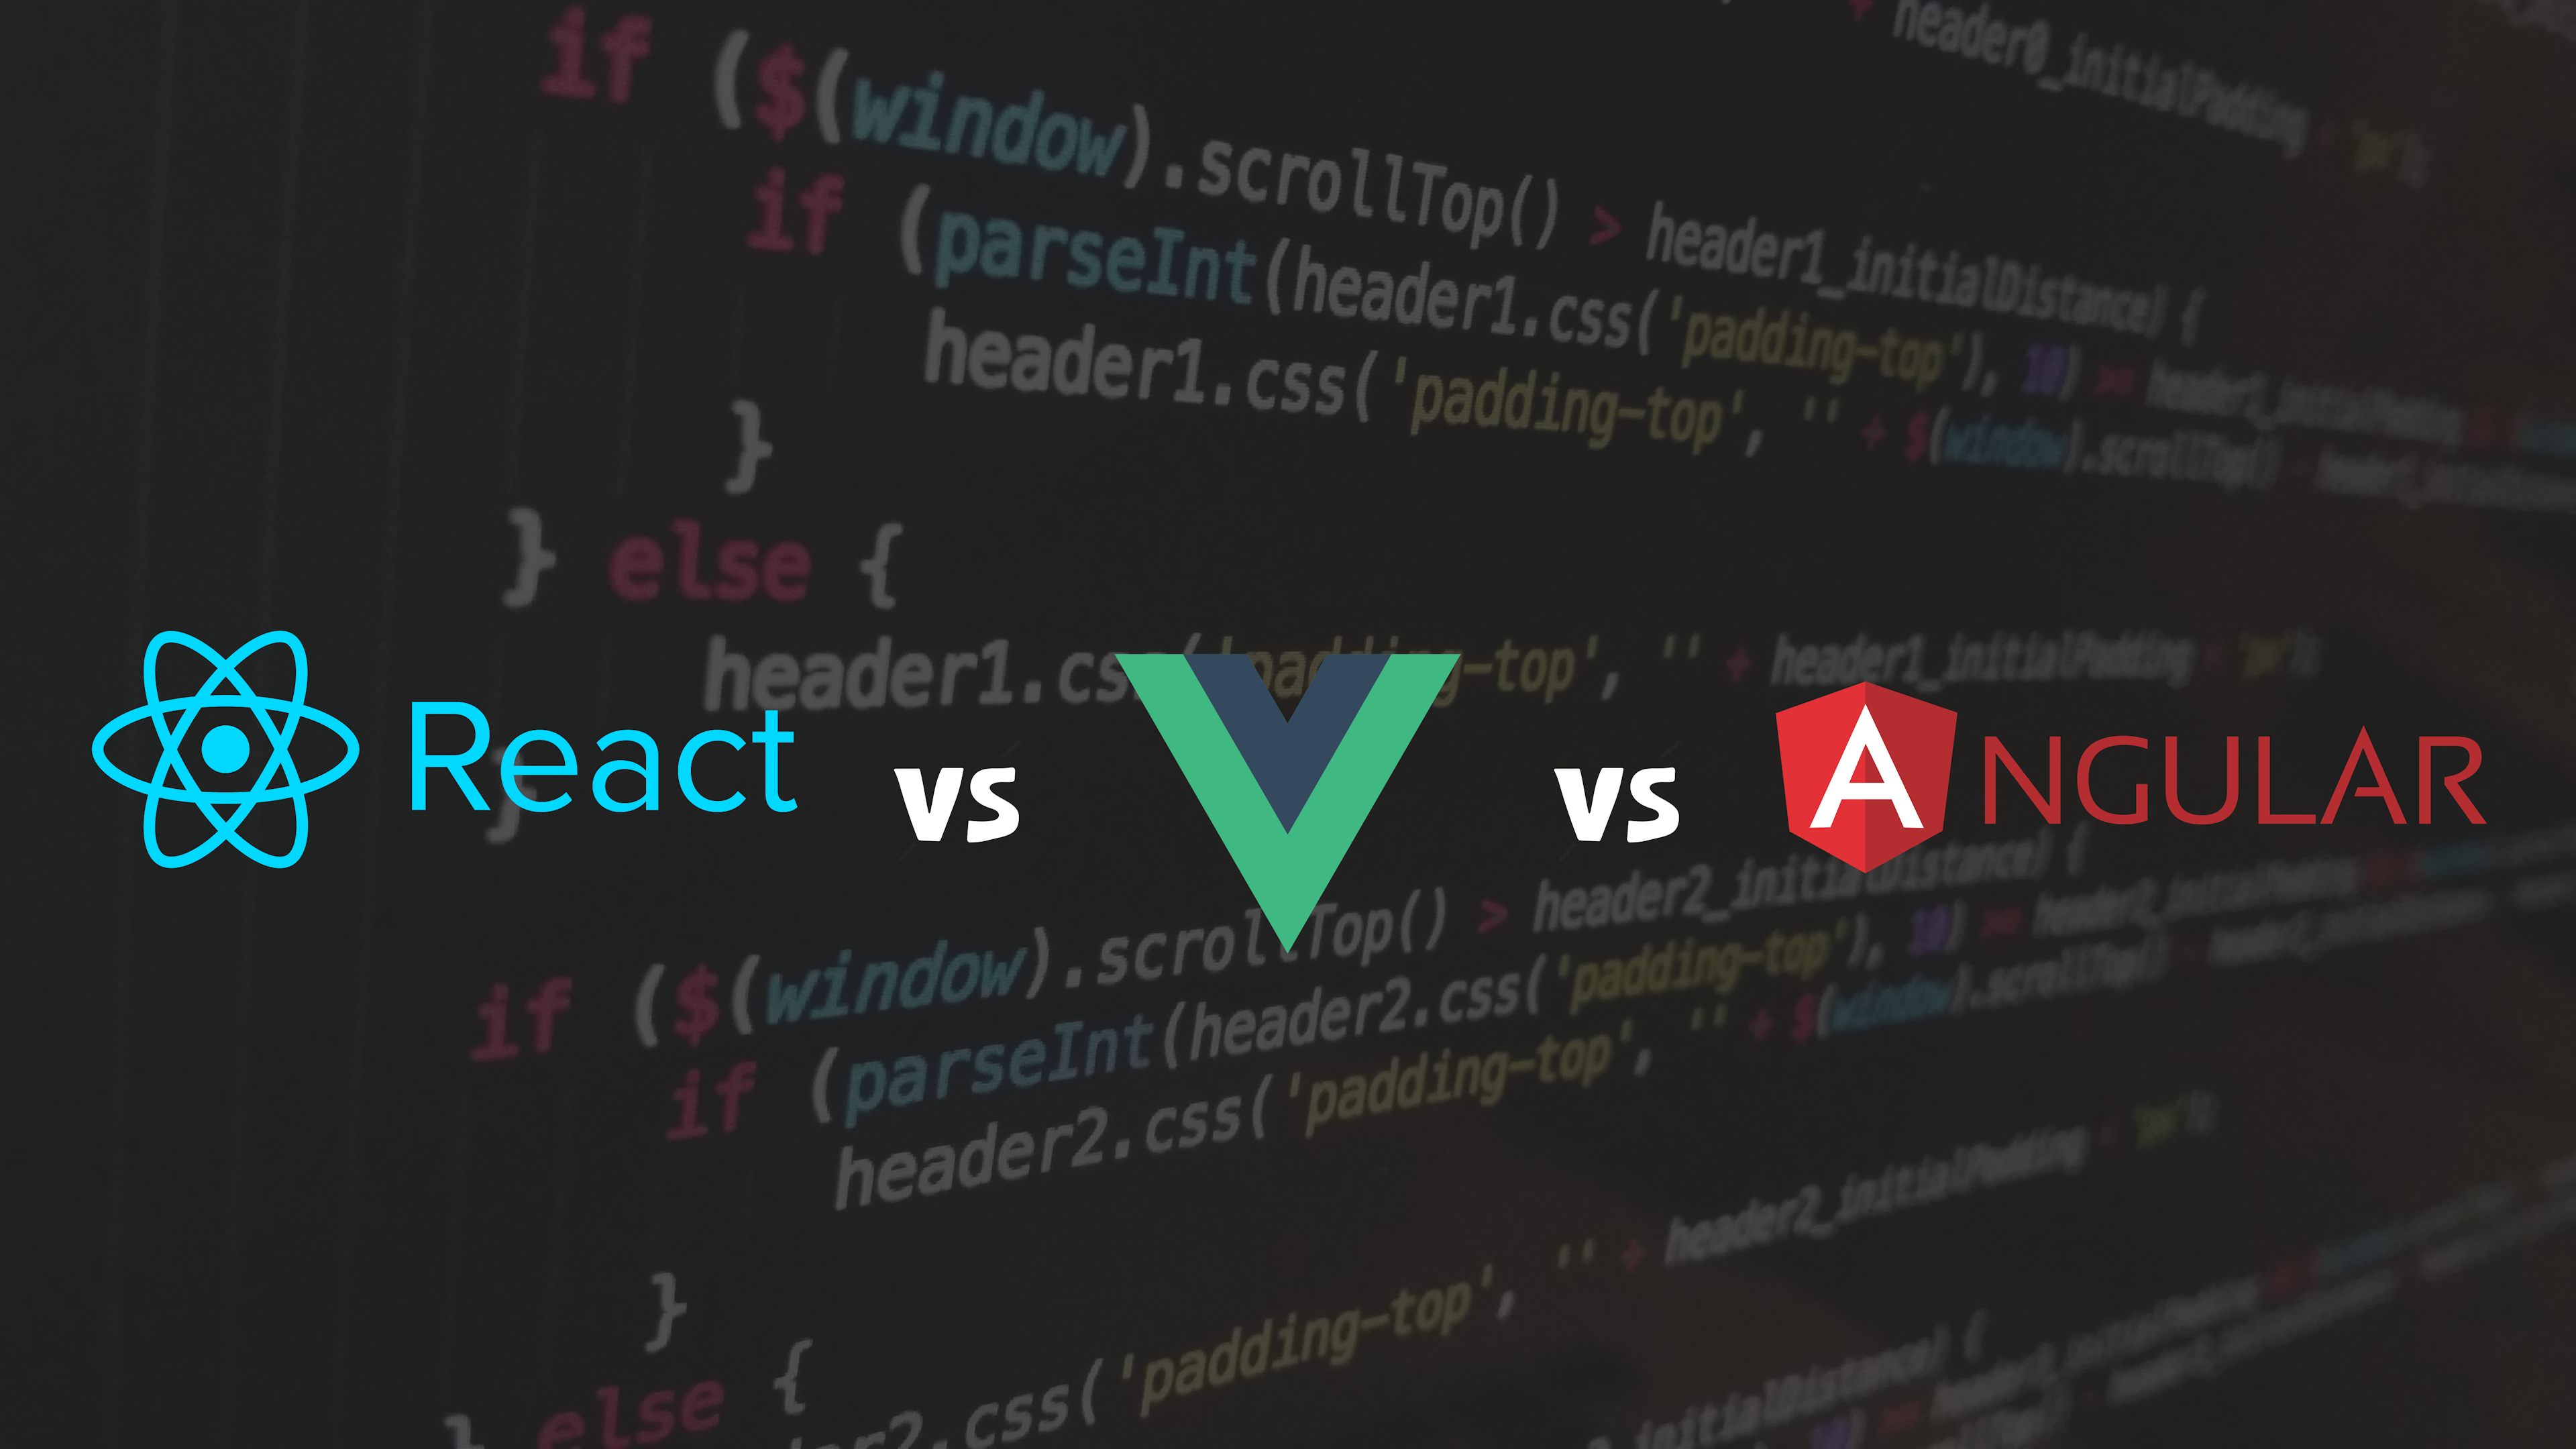 The Complete Guide to React, Angular, and Vue 2022